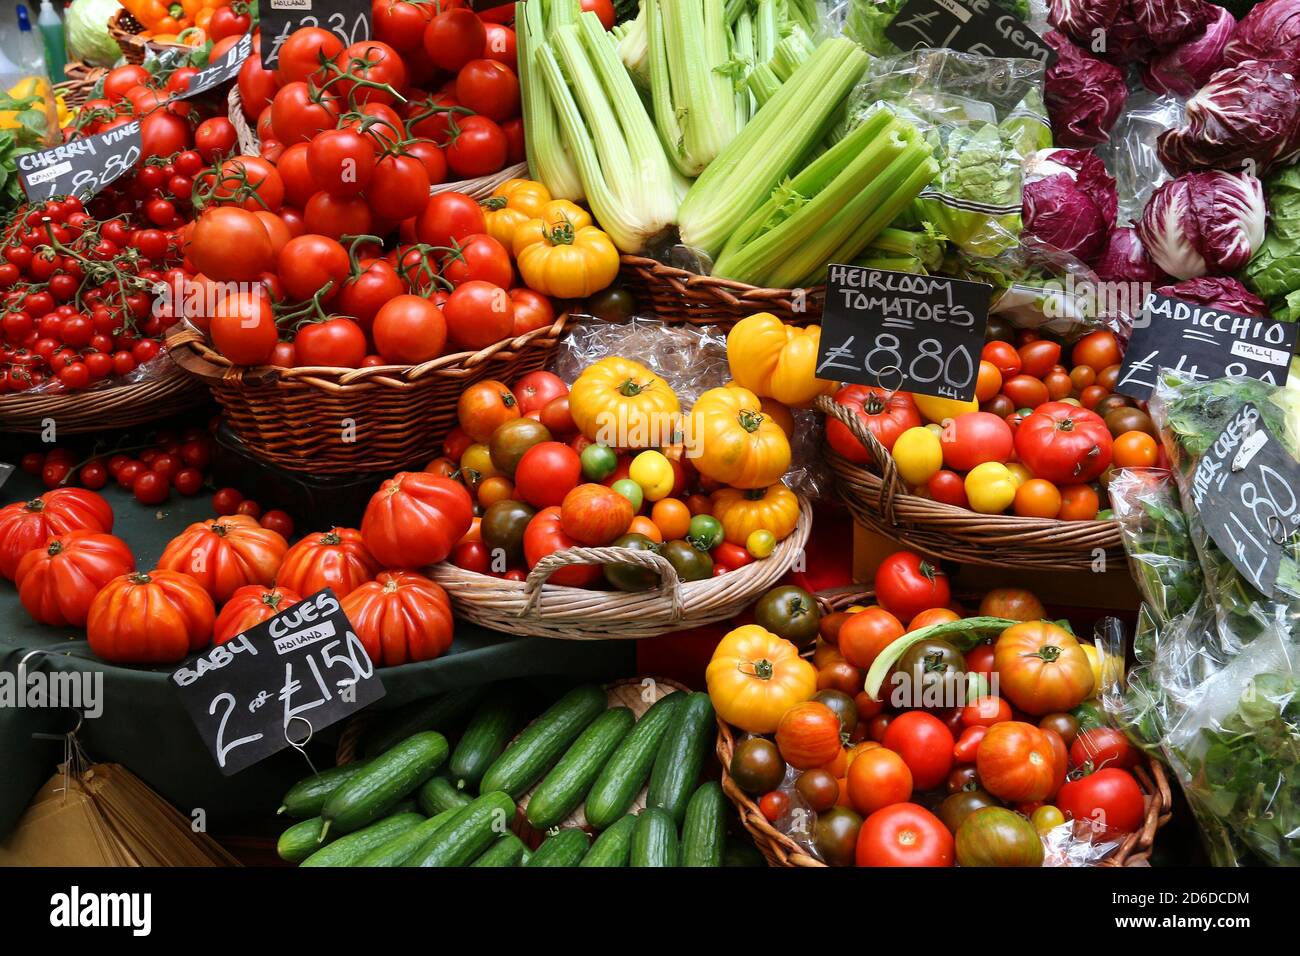 London Borough Market - tomatoes, cucumbers and celery at a marketplace stall. Stock Photo